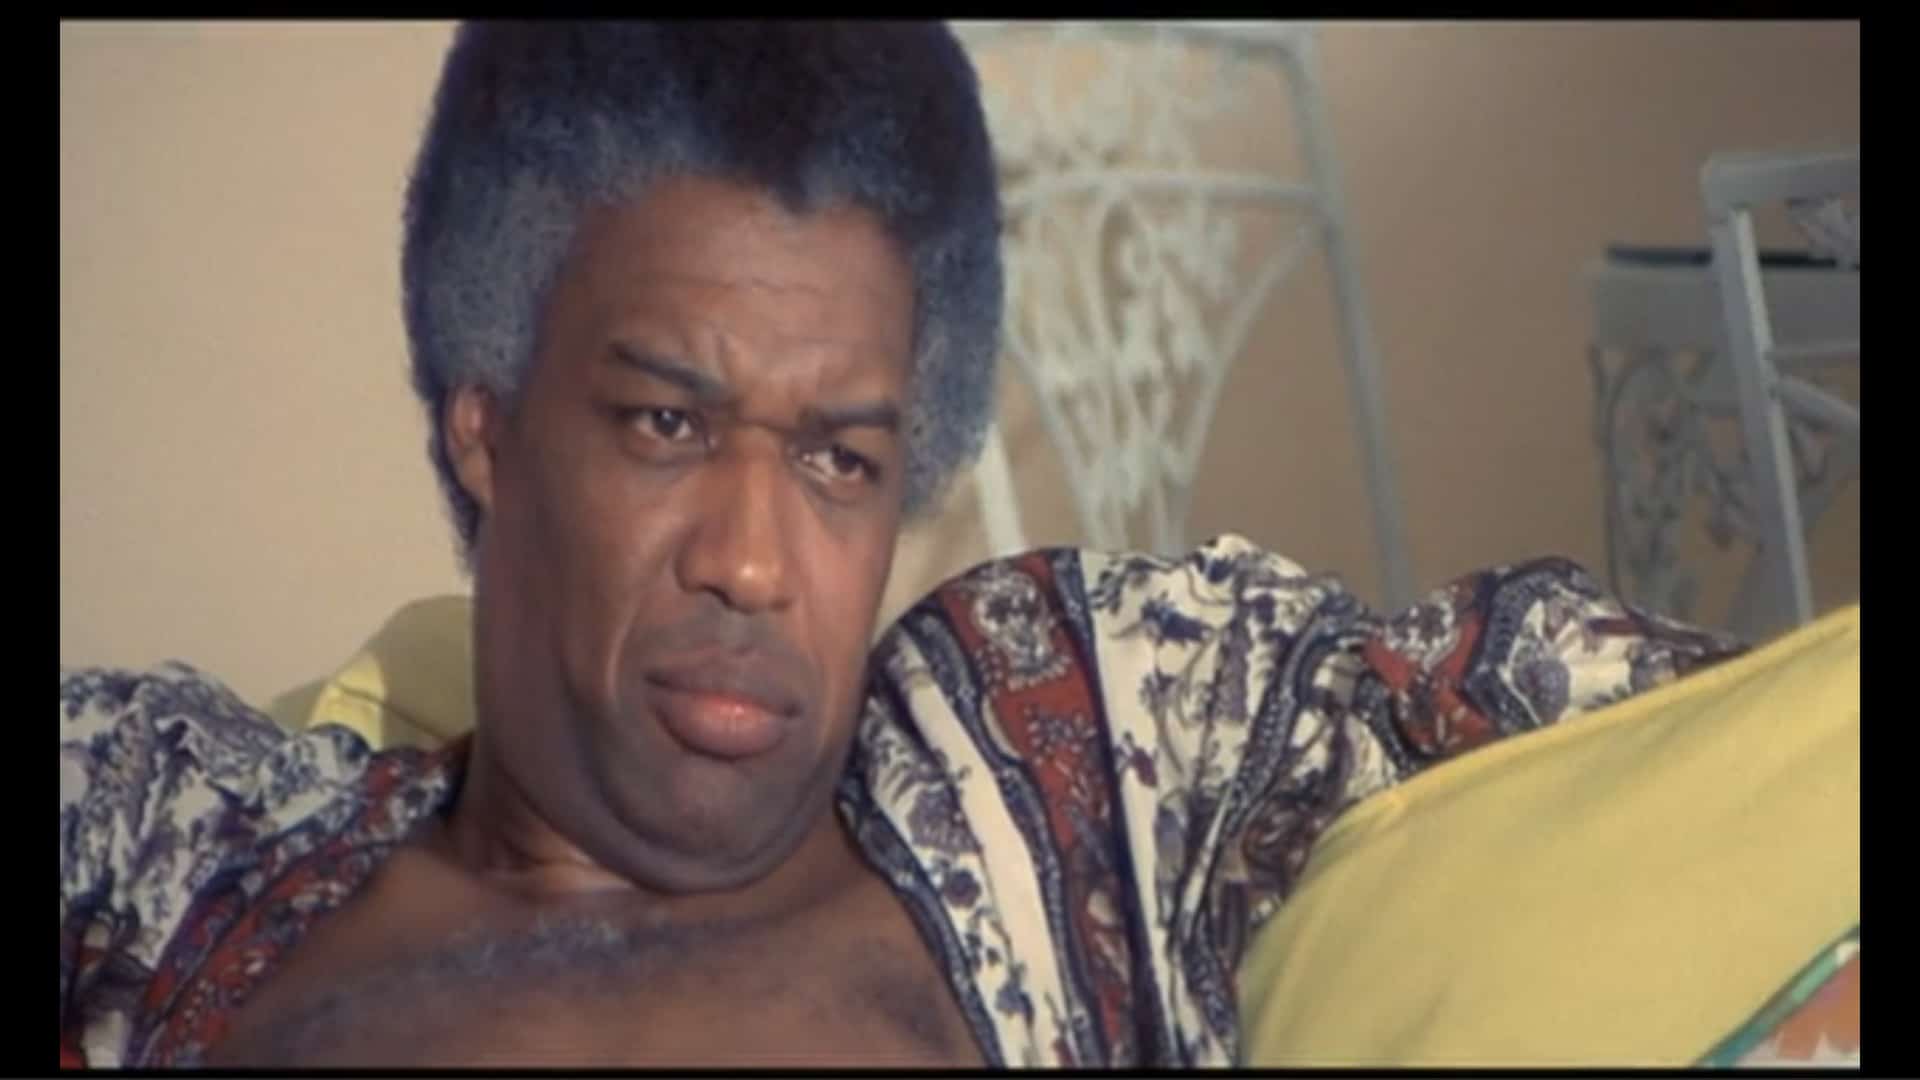 Mr. Peters (Bernie Casey) lounging and having a conversation with his agents